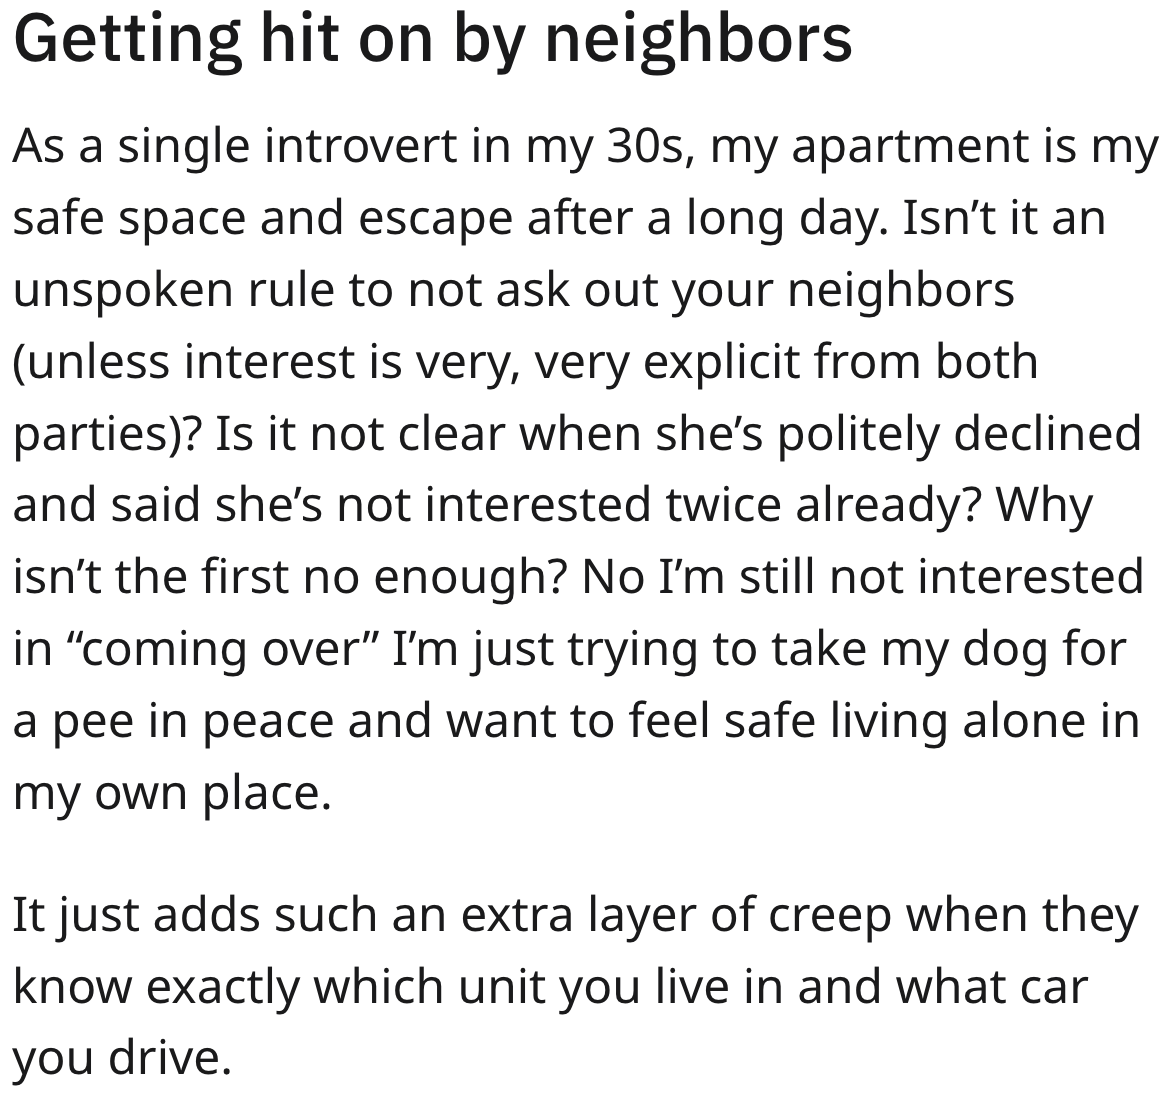 A woman sharing about being hit on by her neighbor